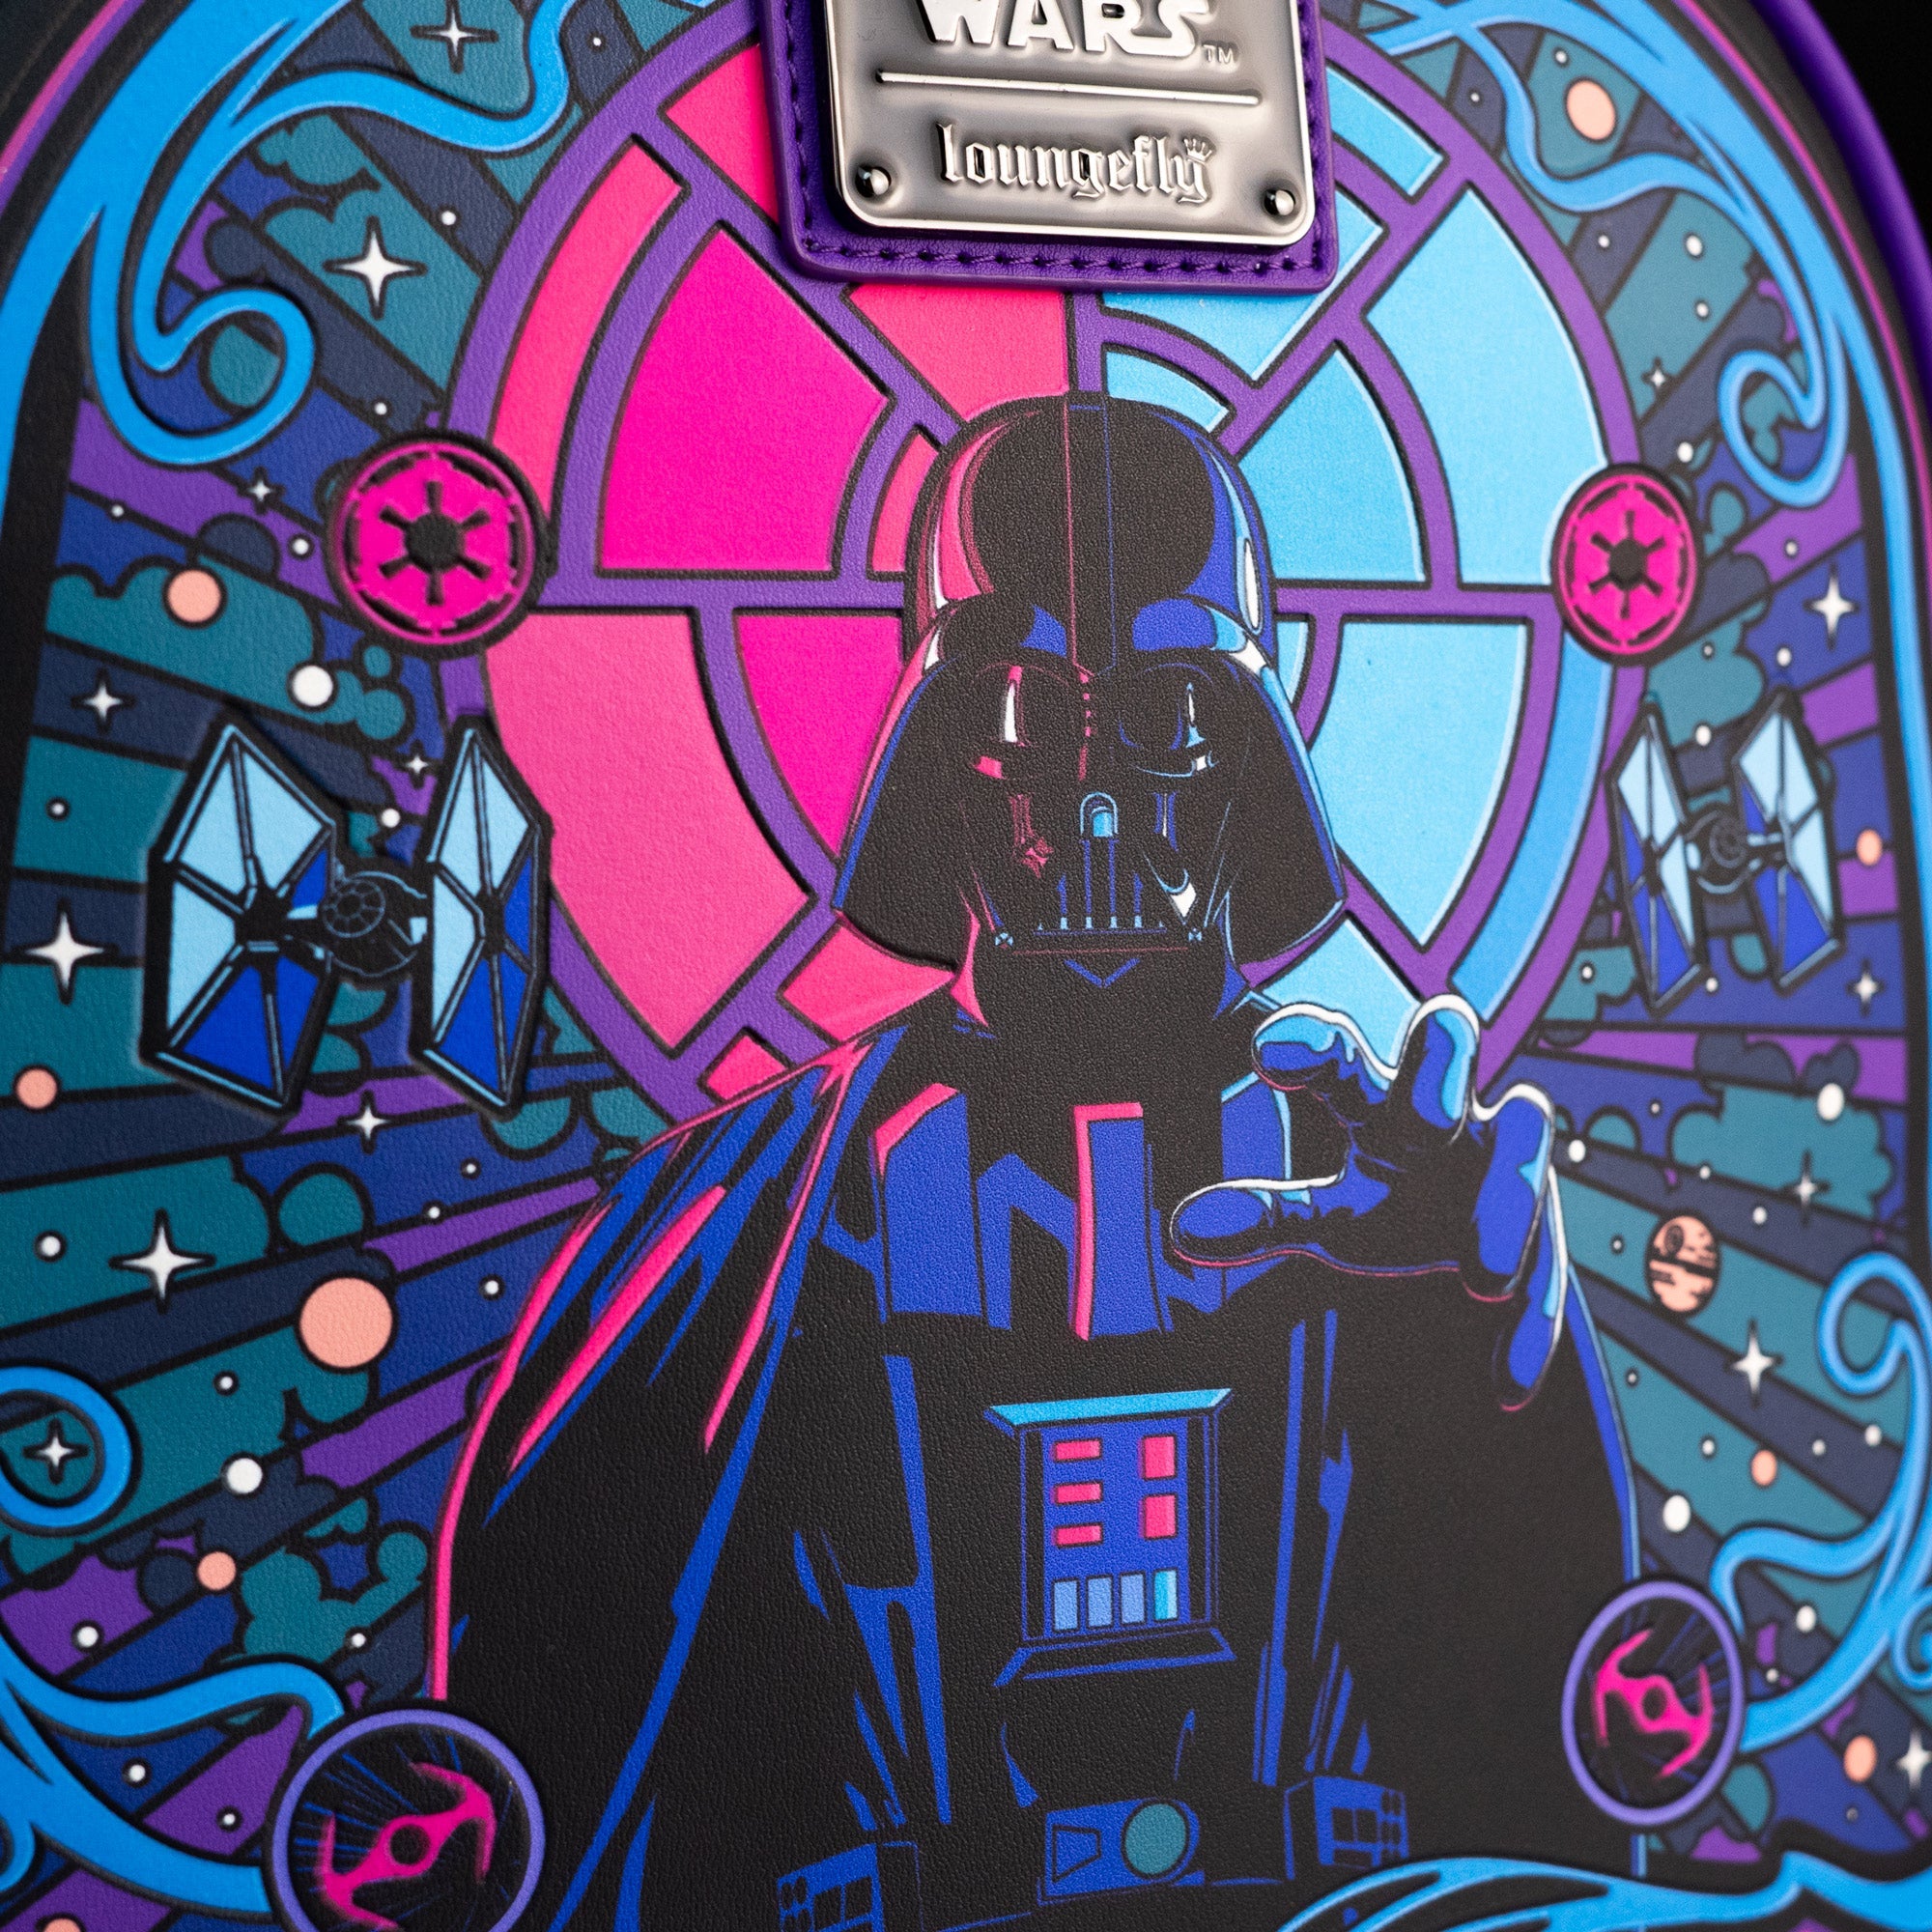 Loungefly x Star Wars Darth Vader Psychedelic Retrowave Portrait Mini Backpack - GeekCore